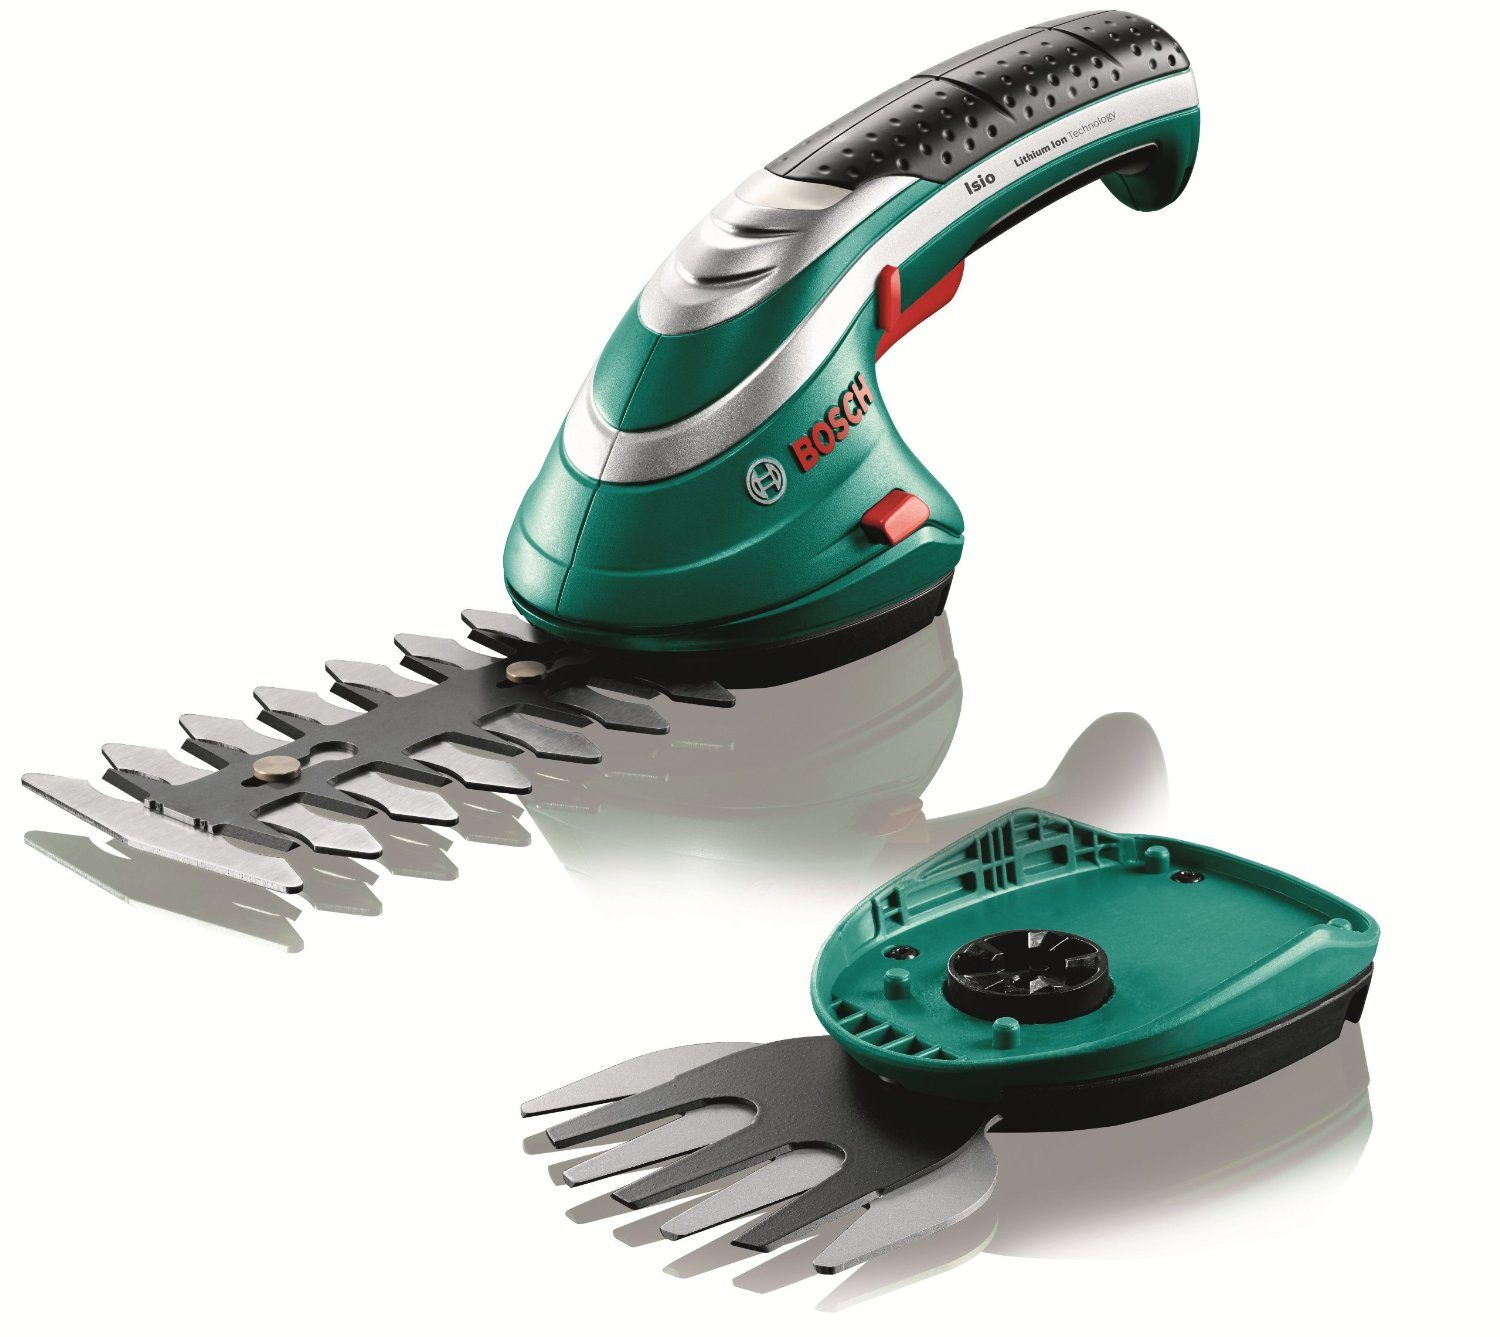 Best Hand Help Grass Trimmers and Edgers Reviews UK 2018